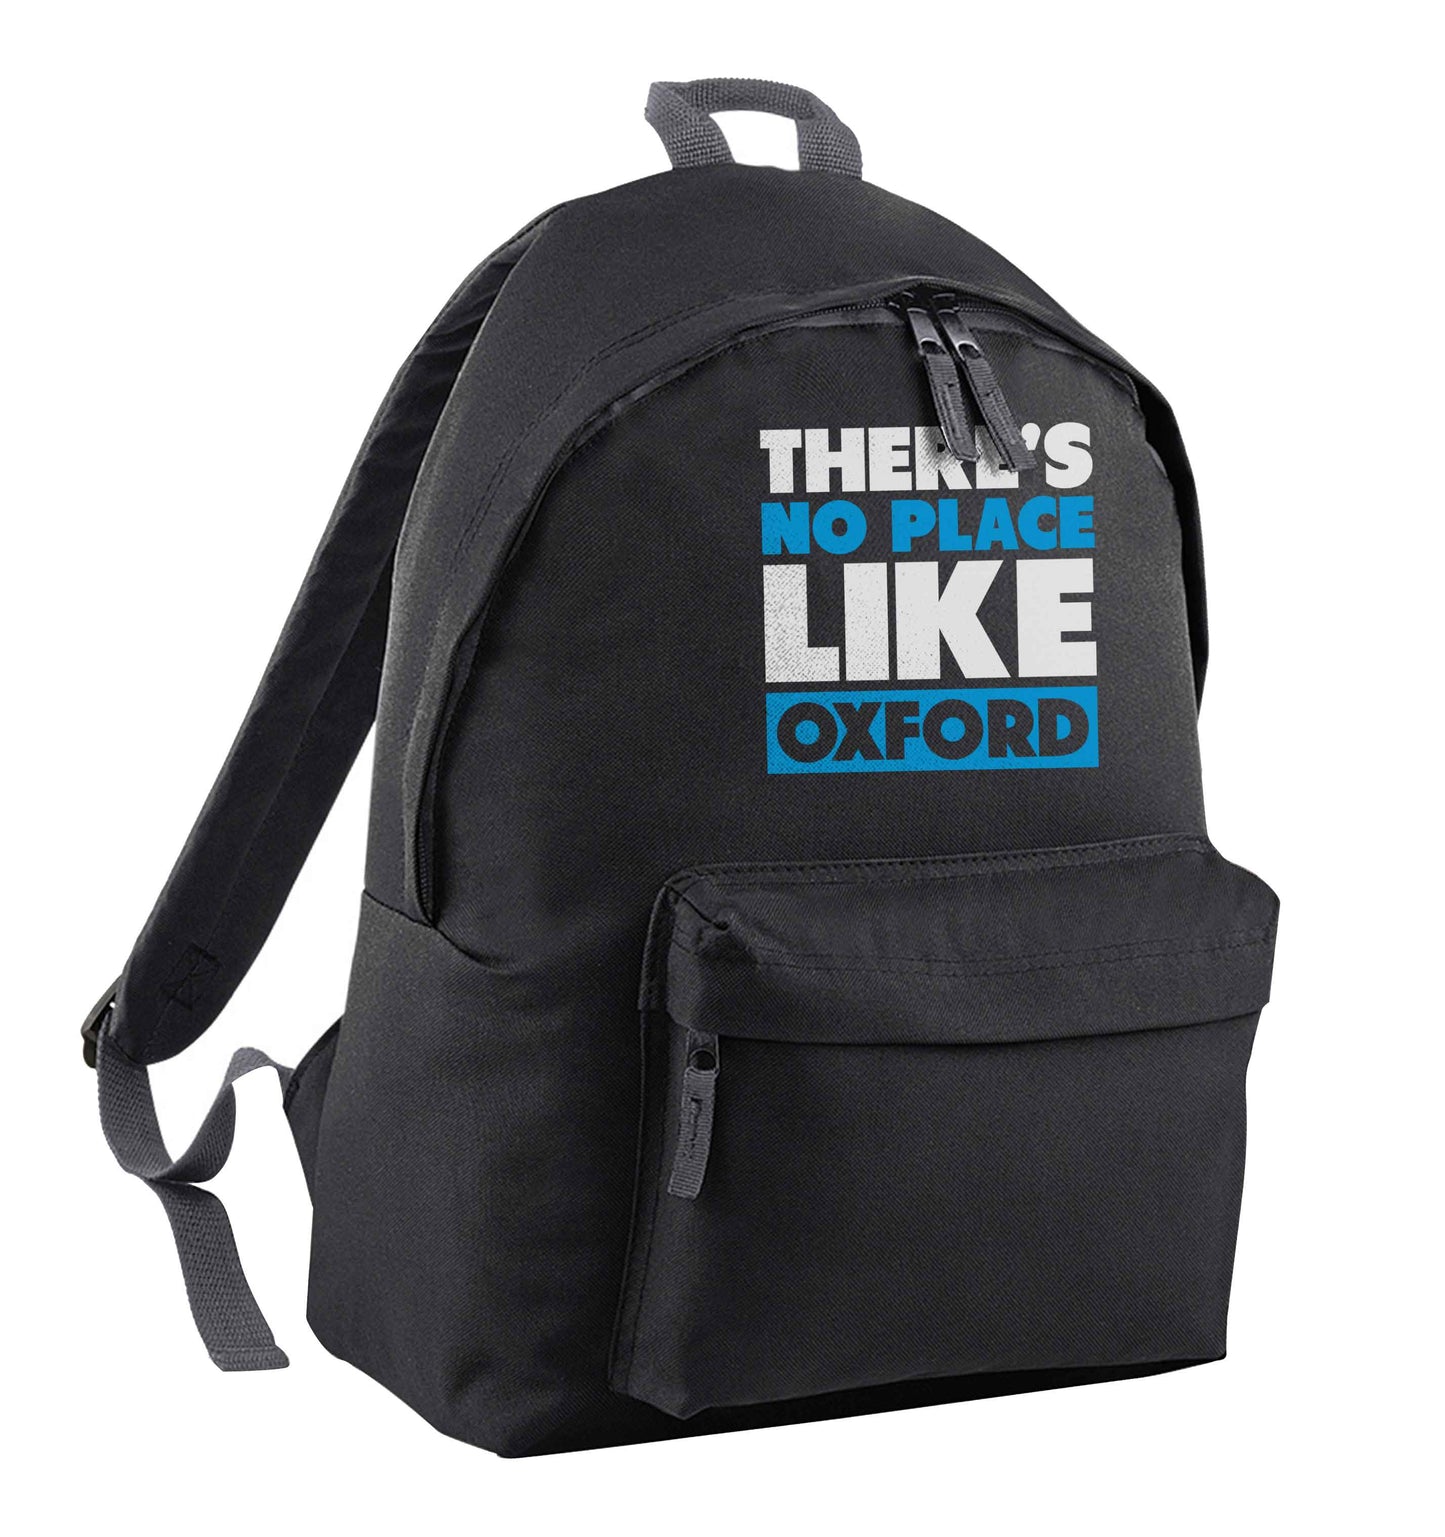 There's no place like Oxford black children's backpack